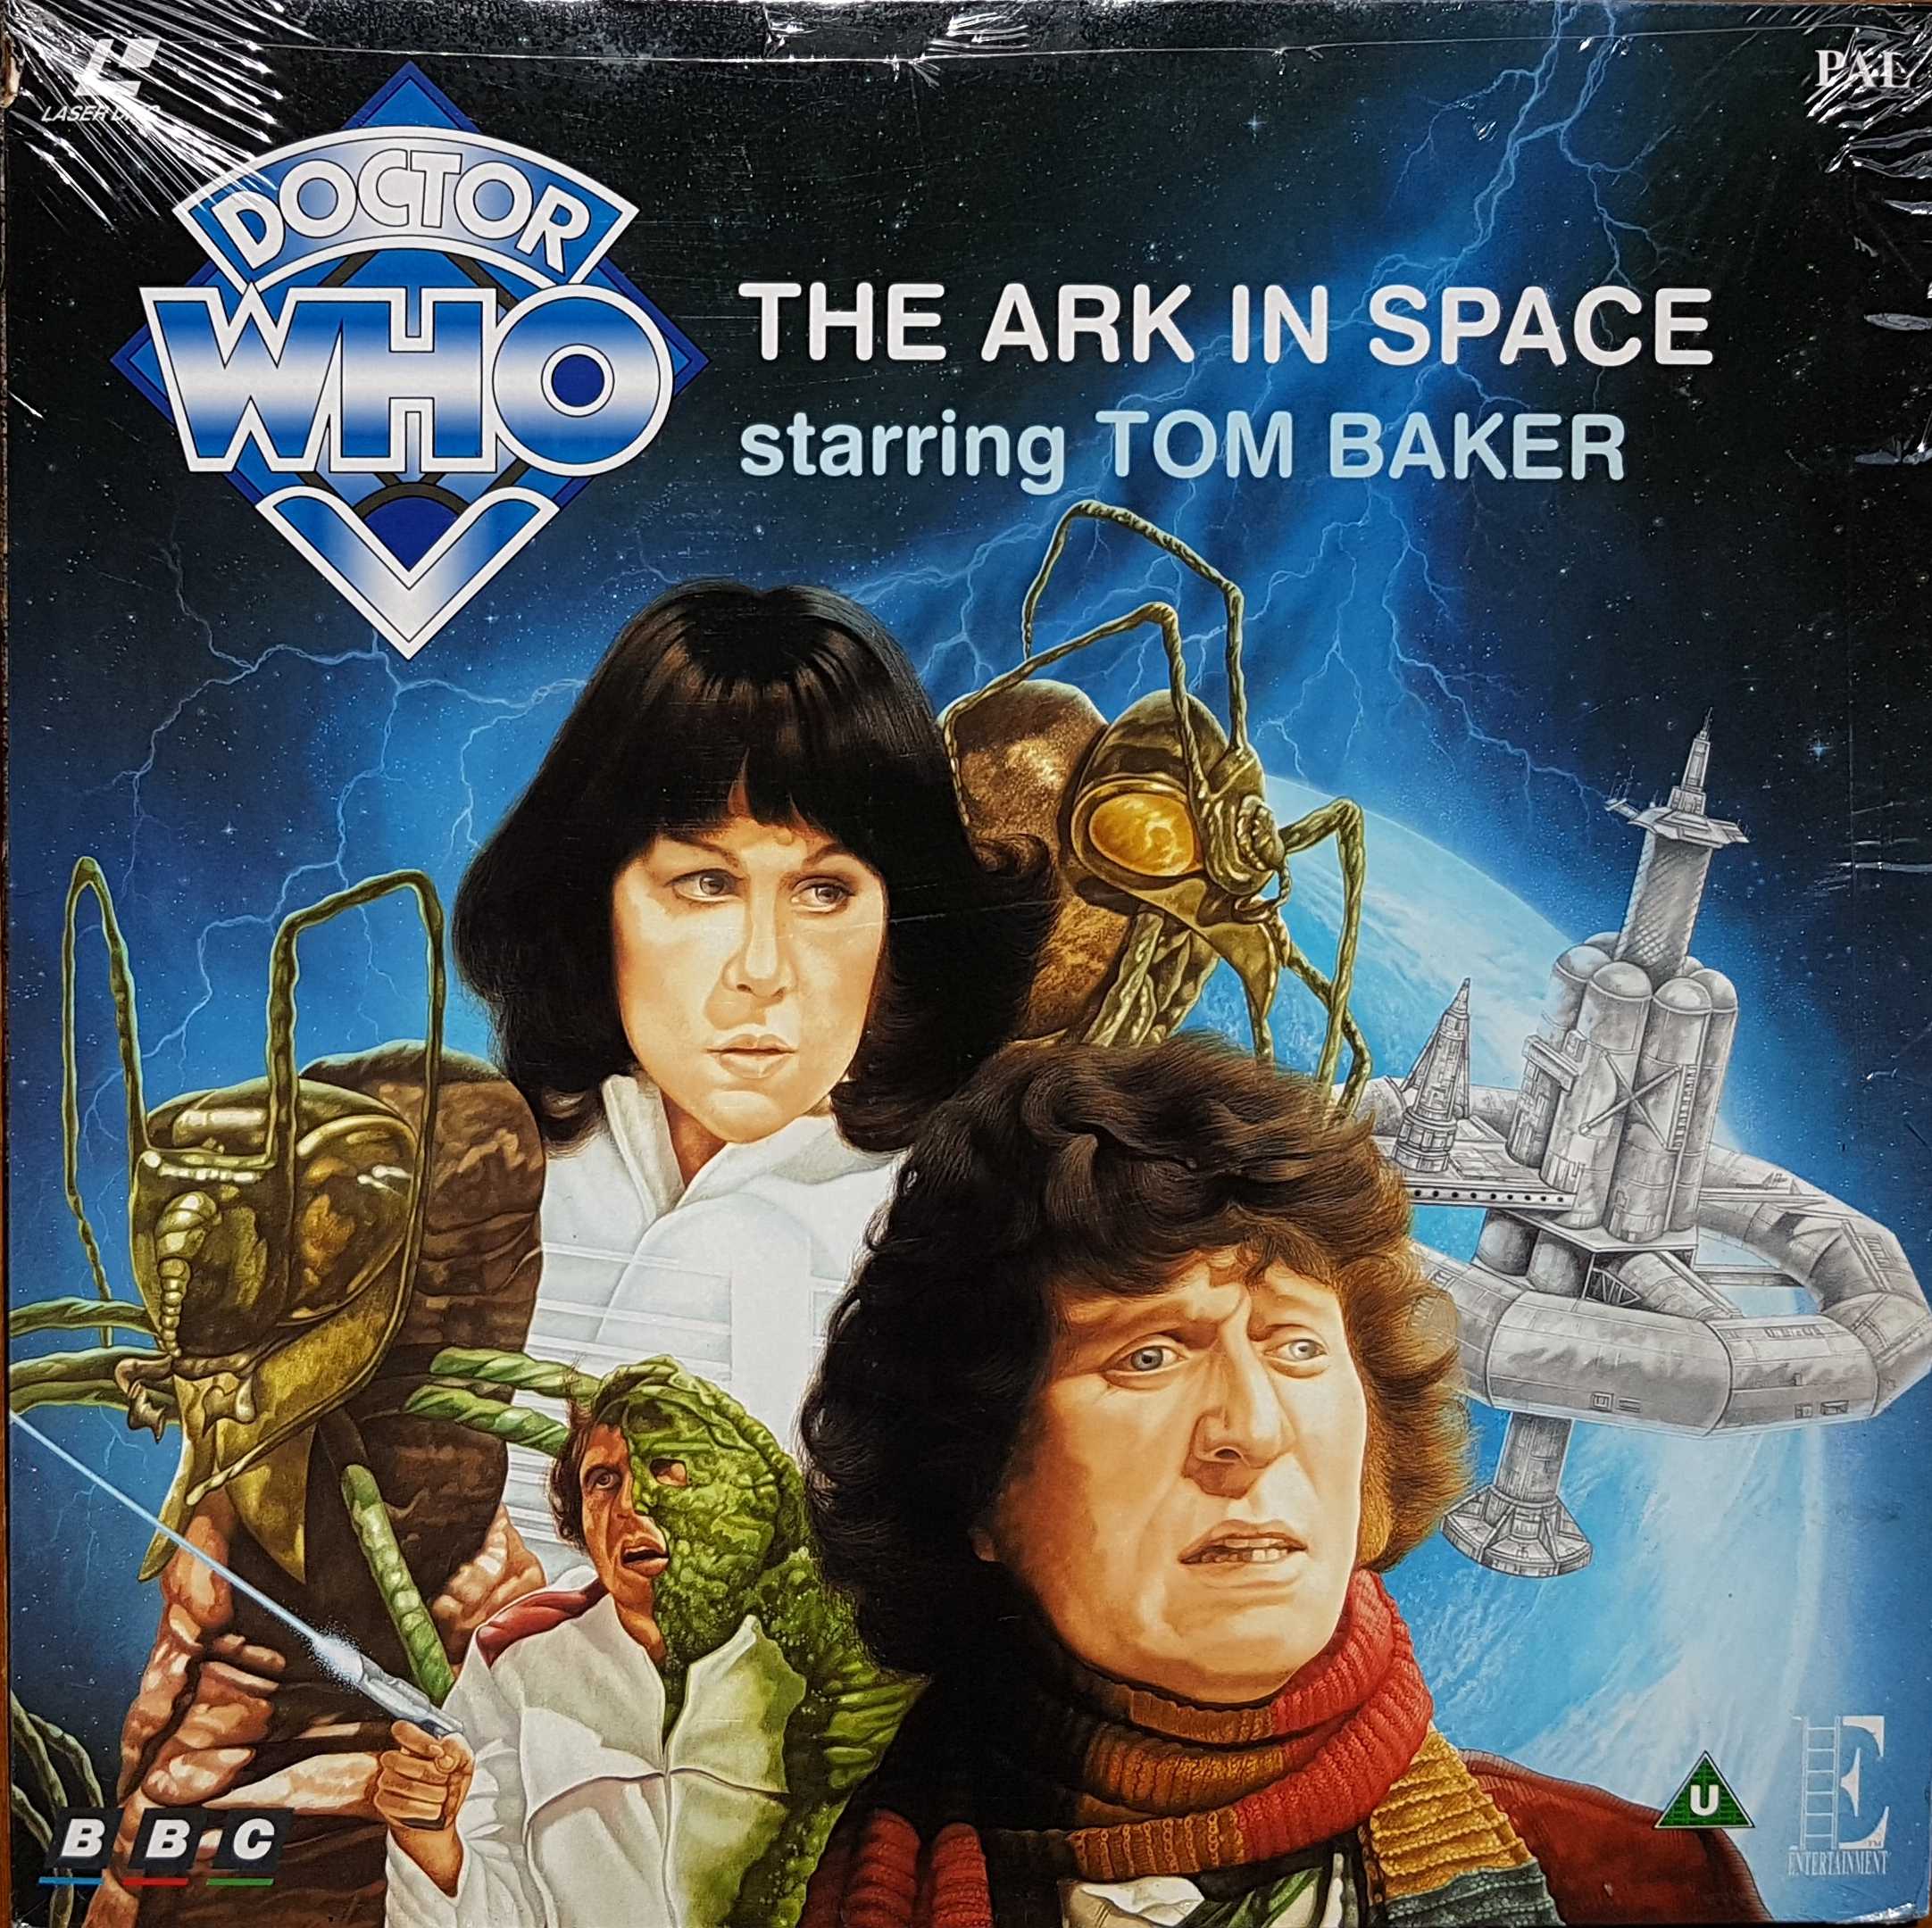 Picture of Doctor Who - The ark in space by artist Robert Holmes / John Lucarotti from the BBC anything_else - Records and Tapes library